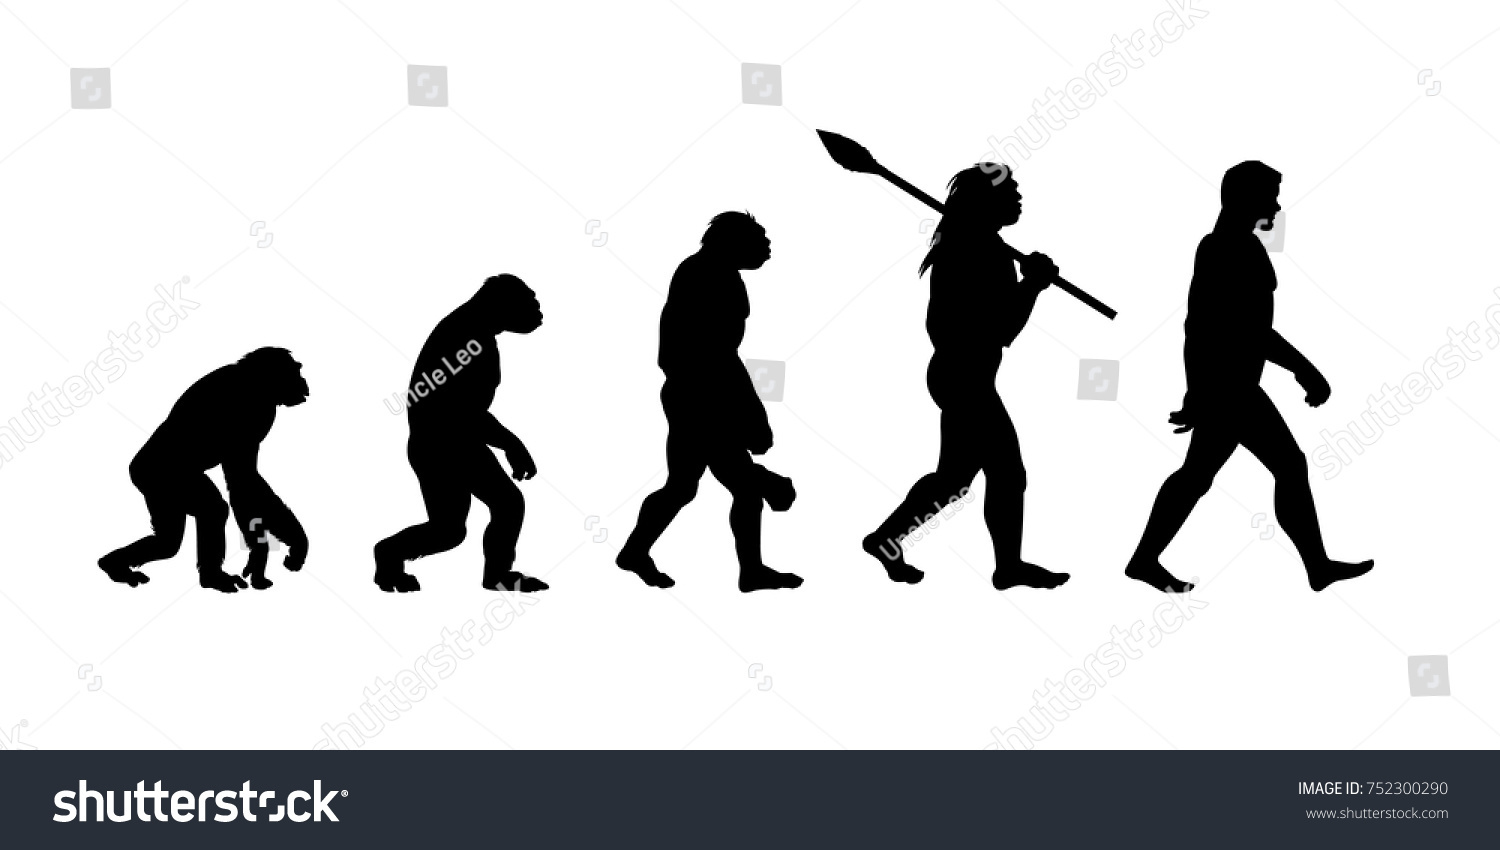 SVG of Theory of evolution of man. silhouette. Human development. Hand drawn sketch vector illustration isolated on white svg